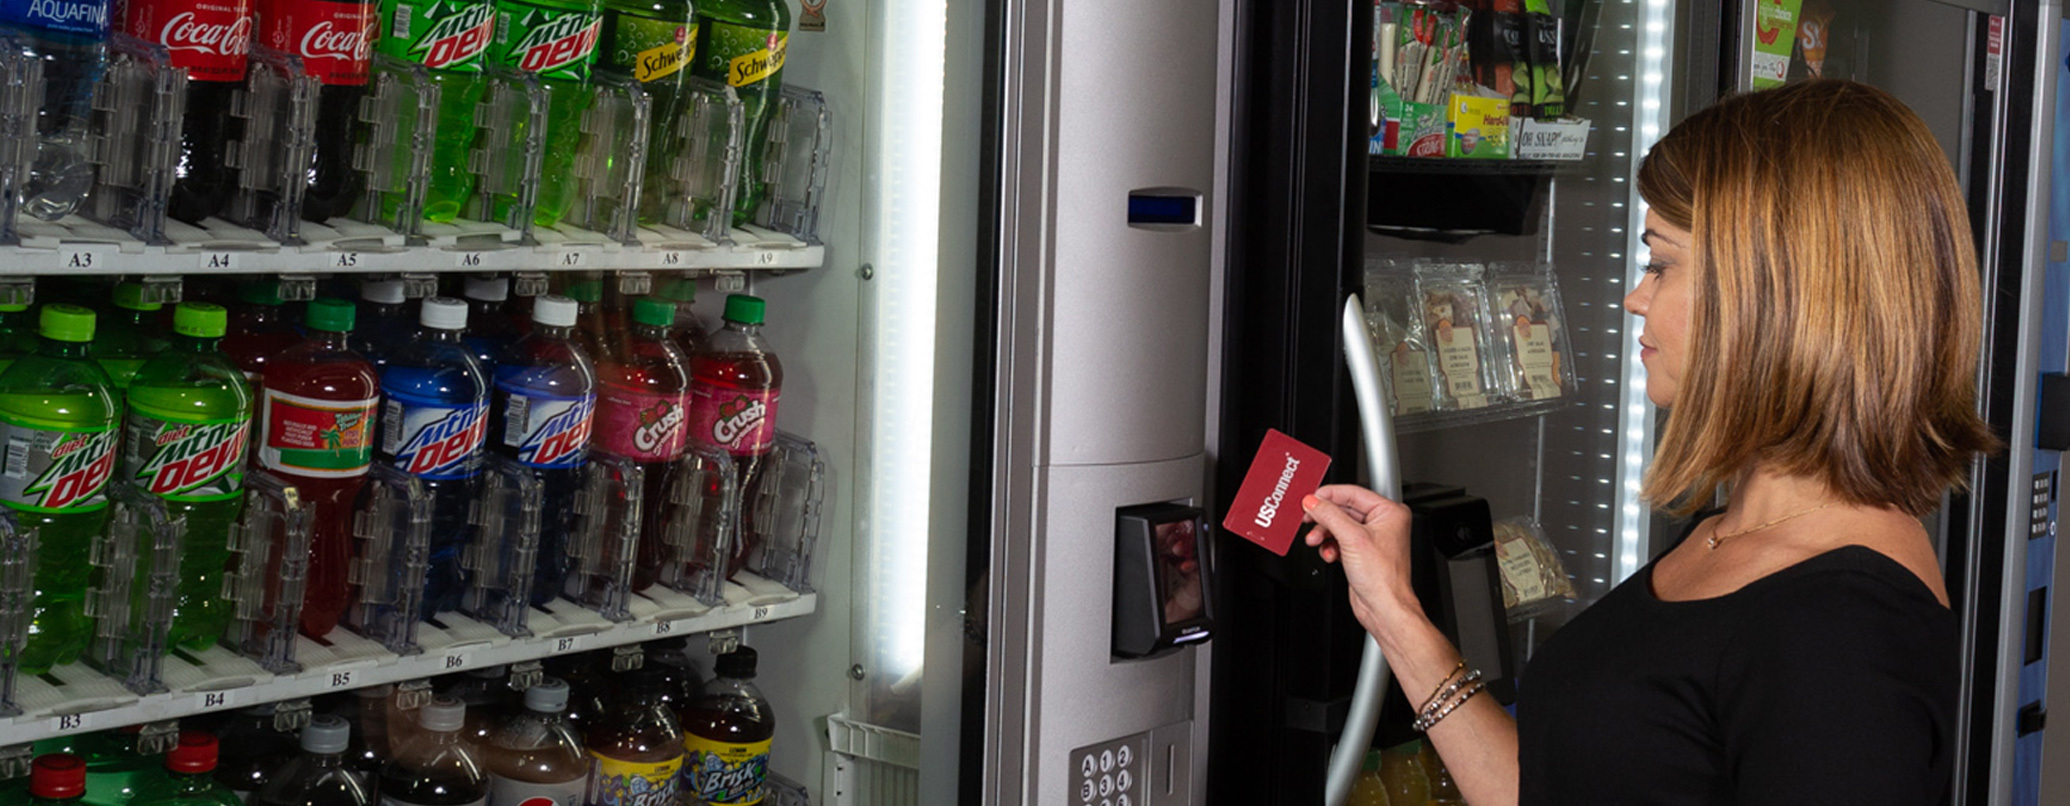 A woman beside a vending machine holding her phone